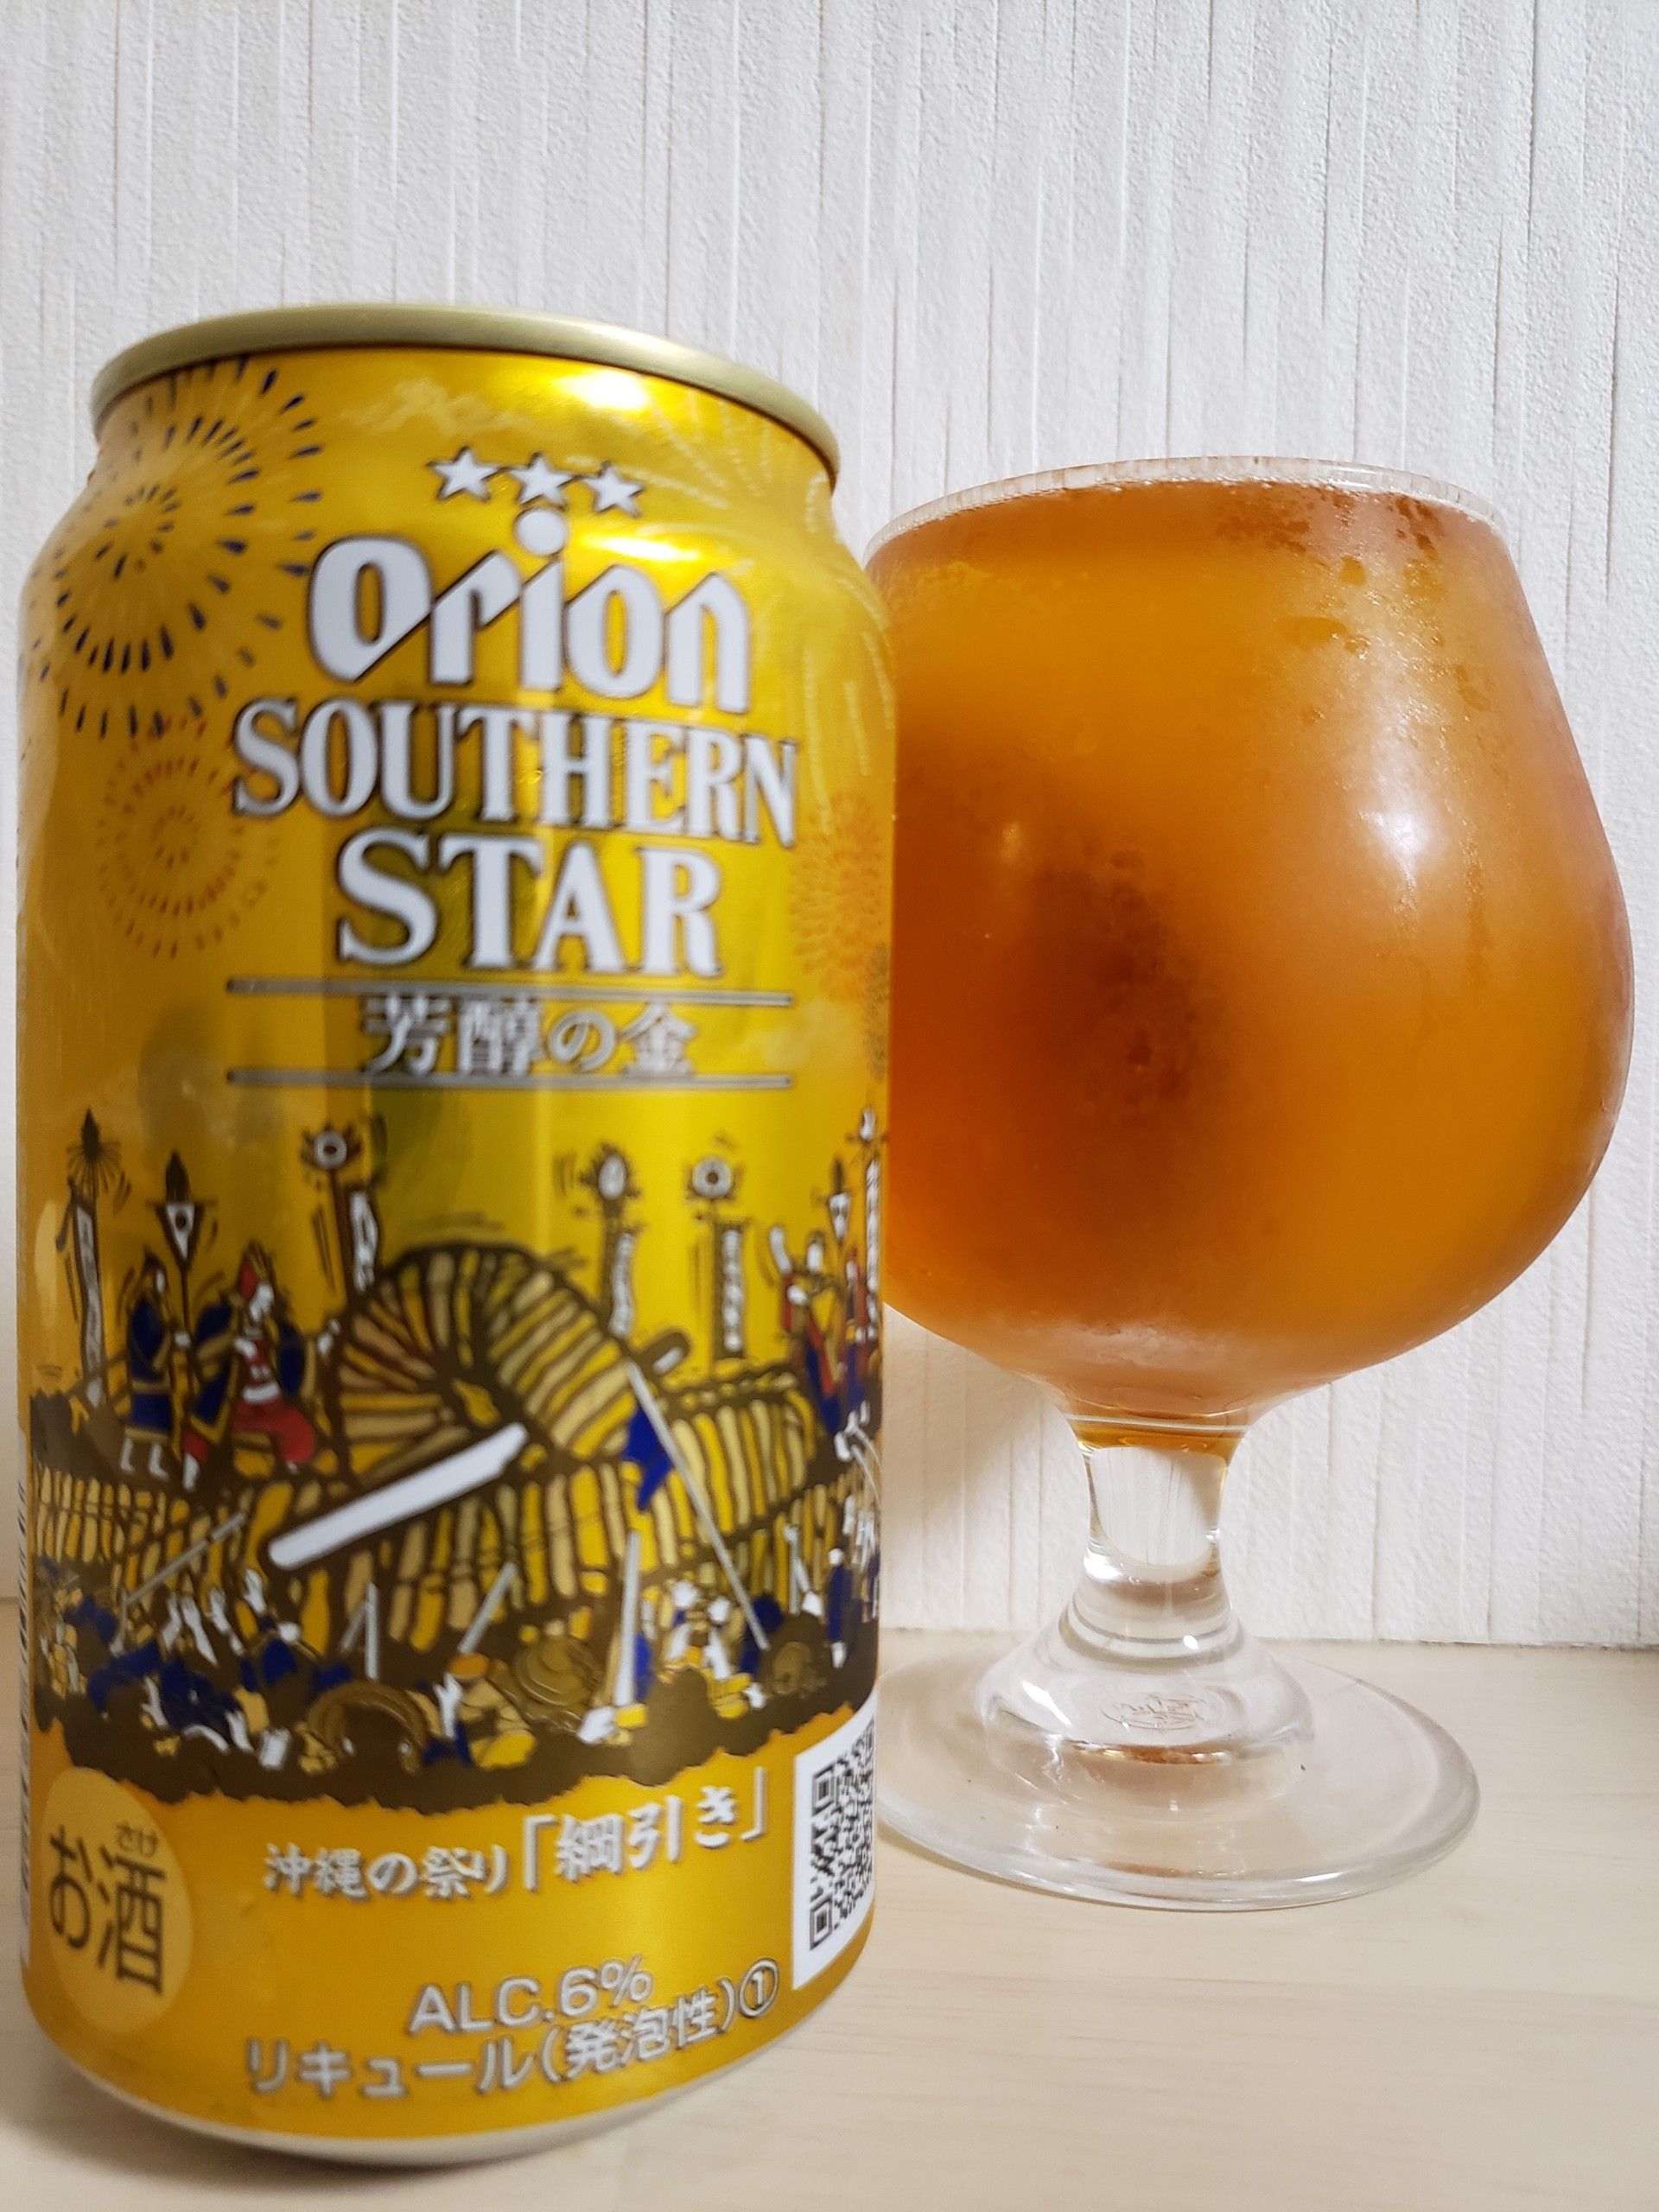 Orion Southern Star 芳醇の金 オリオンビール Beer Beer Beer 楽天ブログ